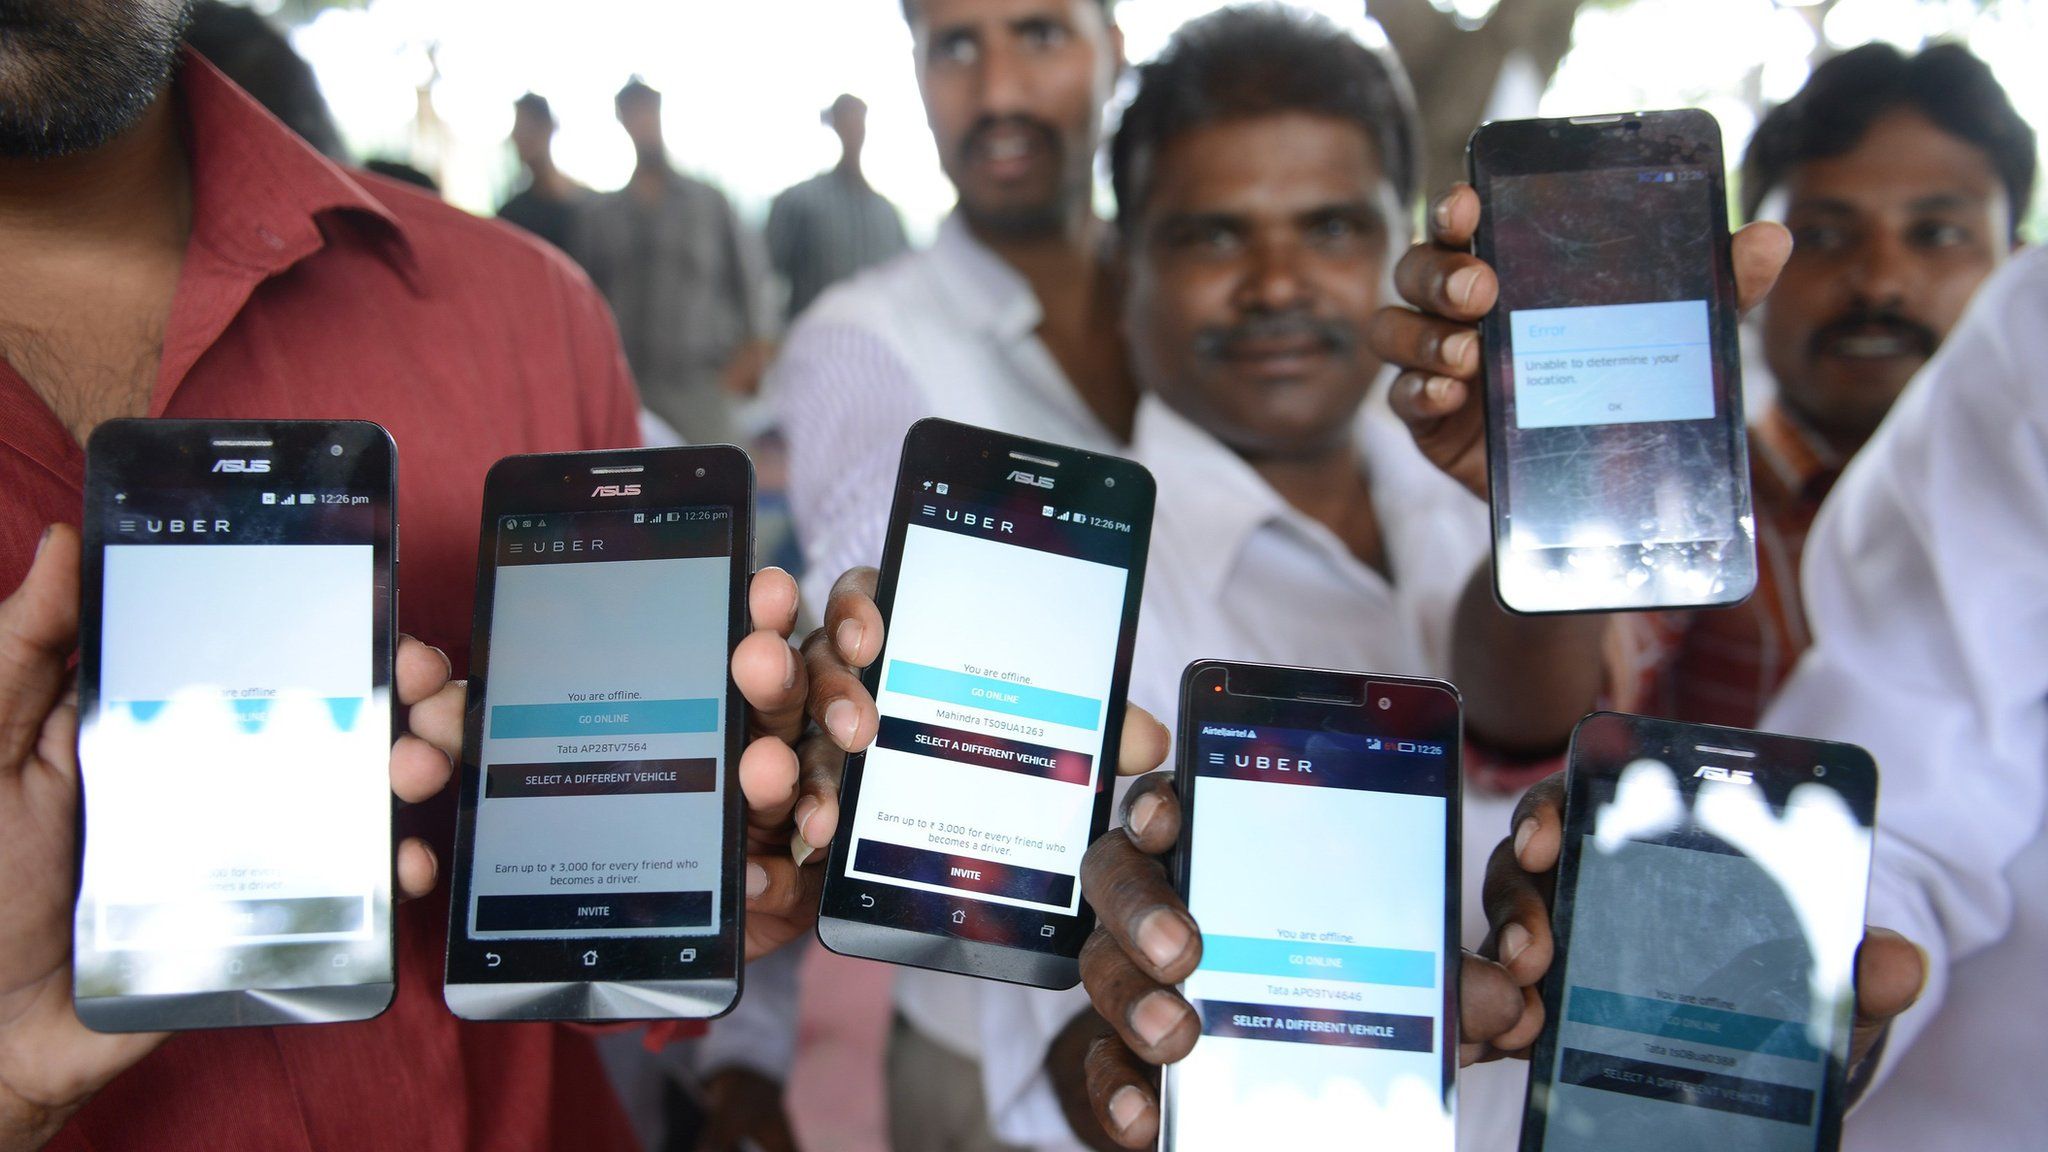 Indian drivers for Uber show mobiles phones given to them by the company